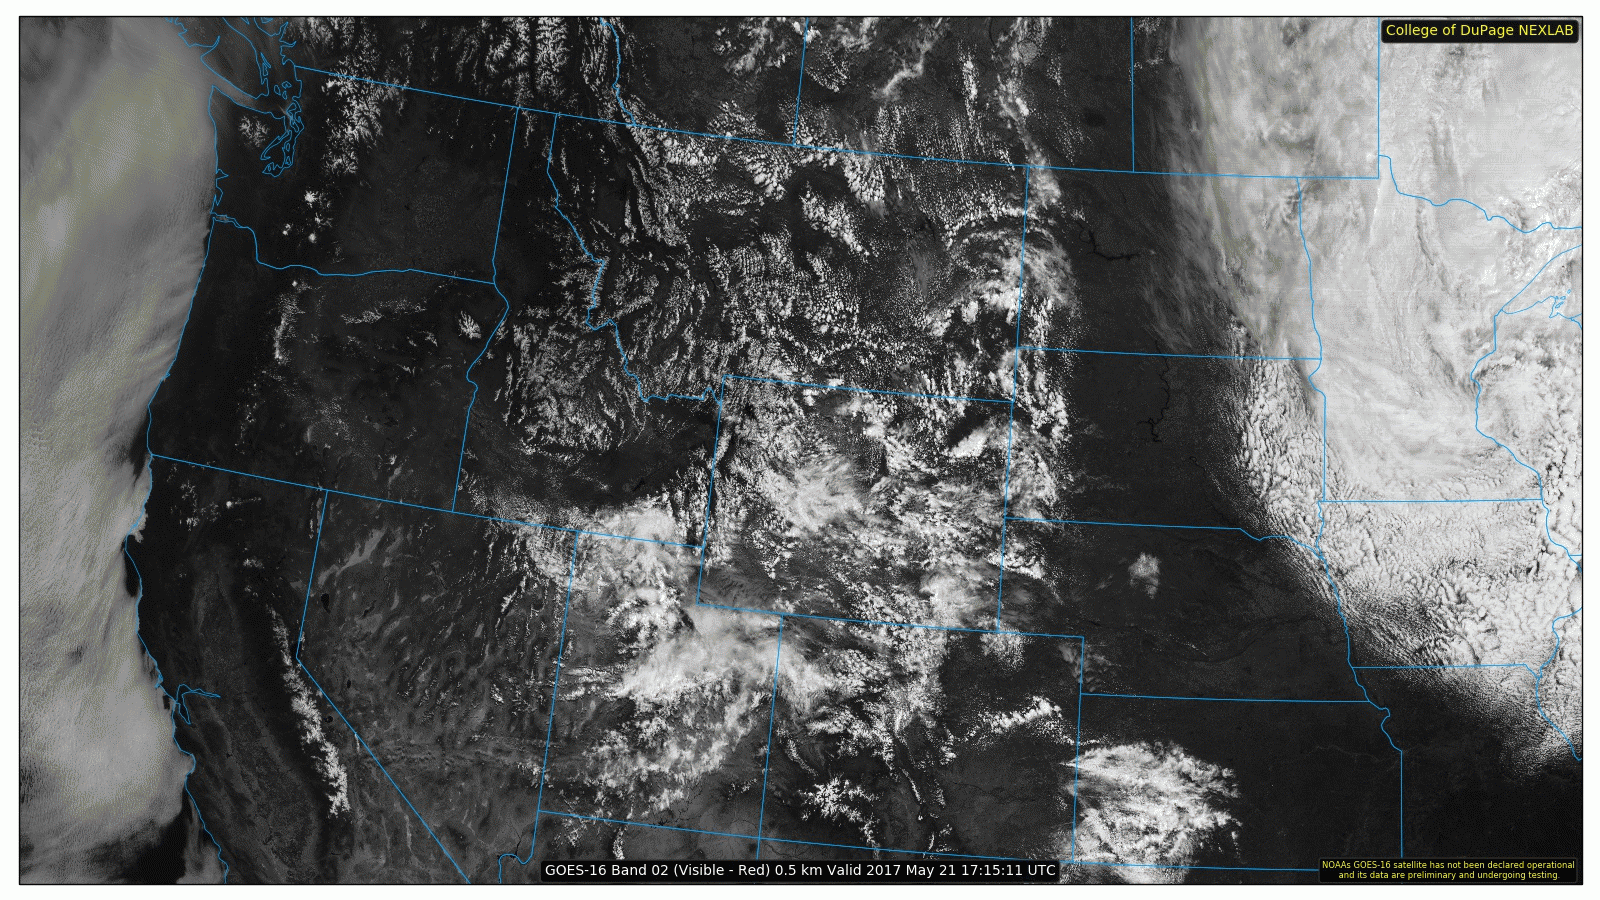 GOES-16 Visible Satellite|Source: COD Weather